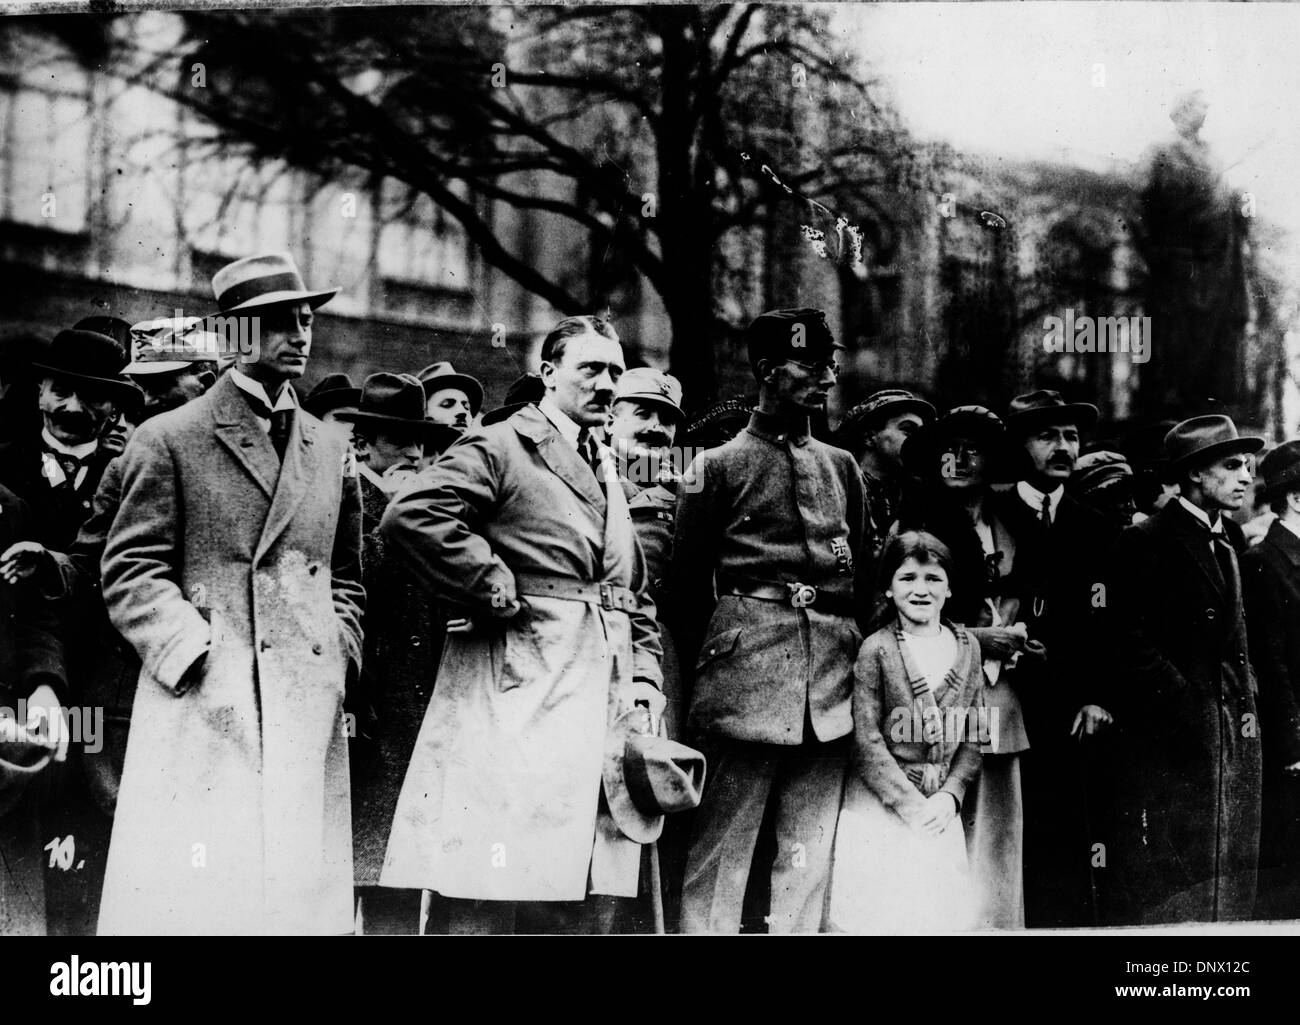 May 1, 1923 - Munich, Germany - Nazi Leader and Fuhrer of Germany, ADOLF HITLER (C) with ALFRED ROSENBERG (L) and Dr. FREDRICK TOBEN at Oberland Free Corps in Munich. (Credit Image: © KEYSTONE Pictures/ZUMAPRESS.com) Stock Photo